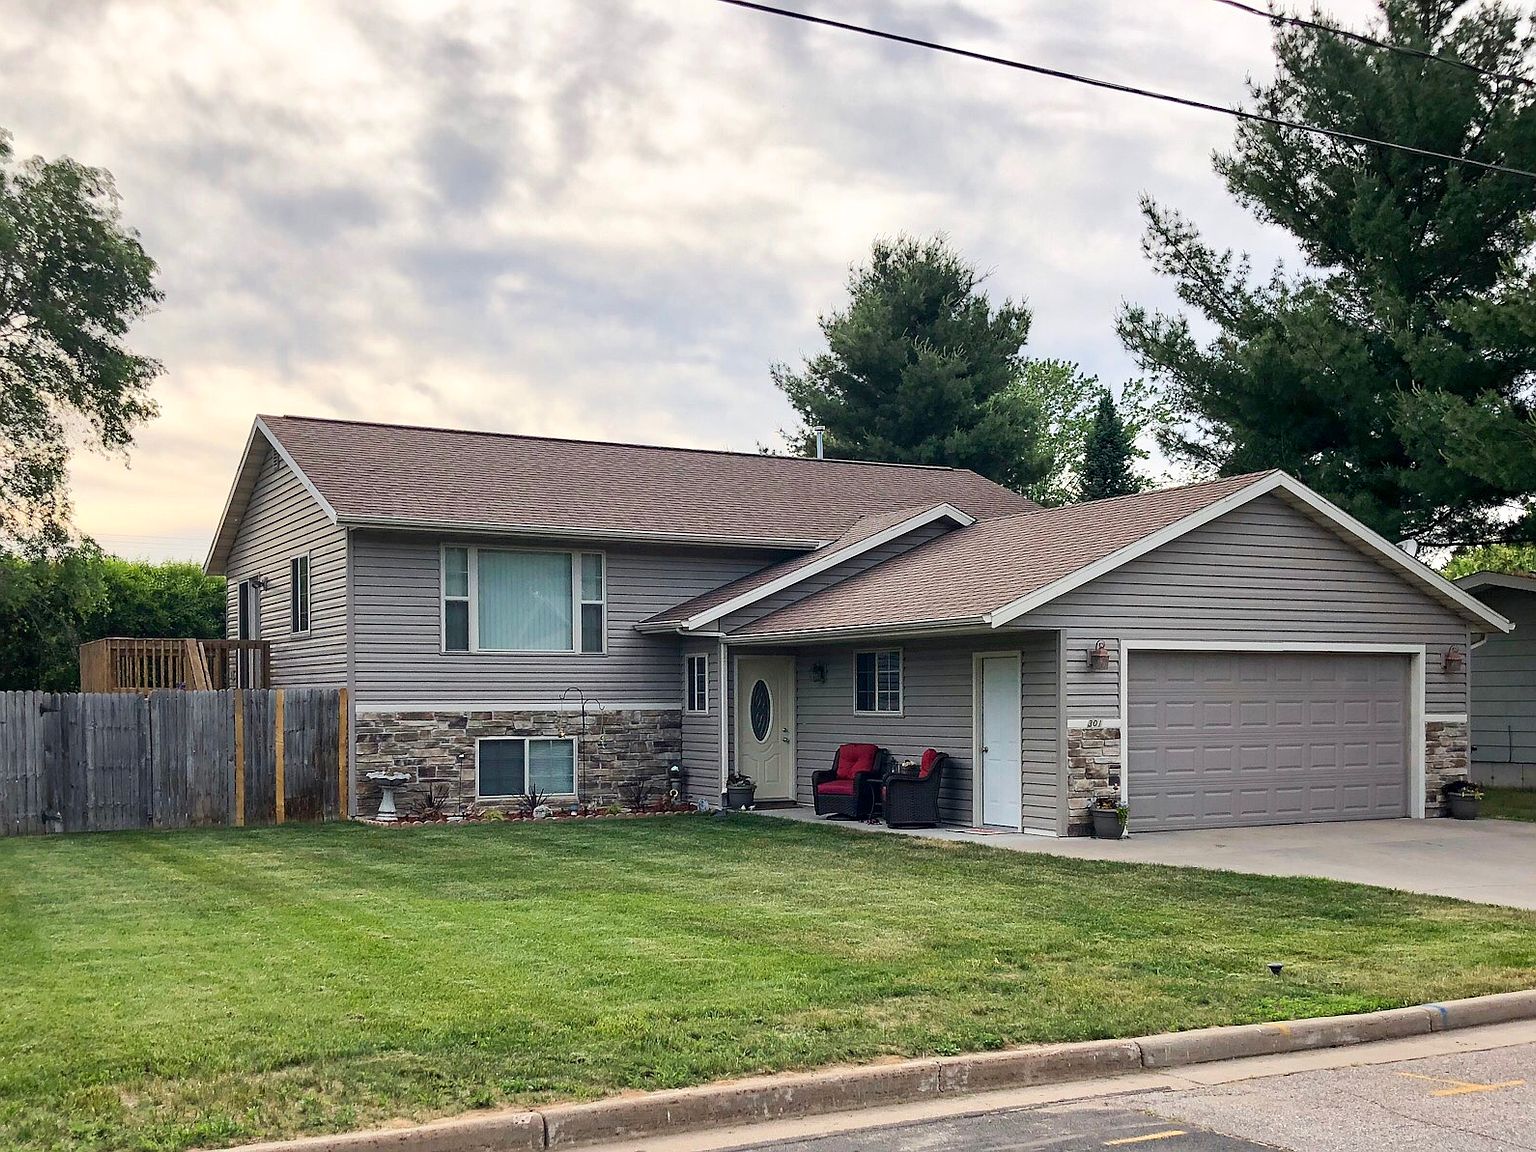 301 George St, Mosinee, WI 54455 | Zillow